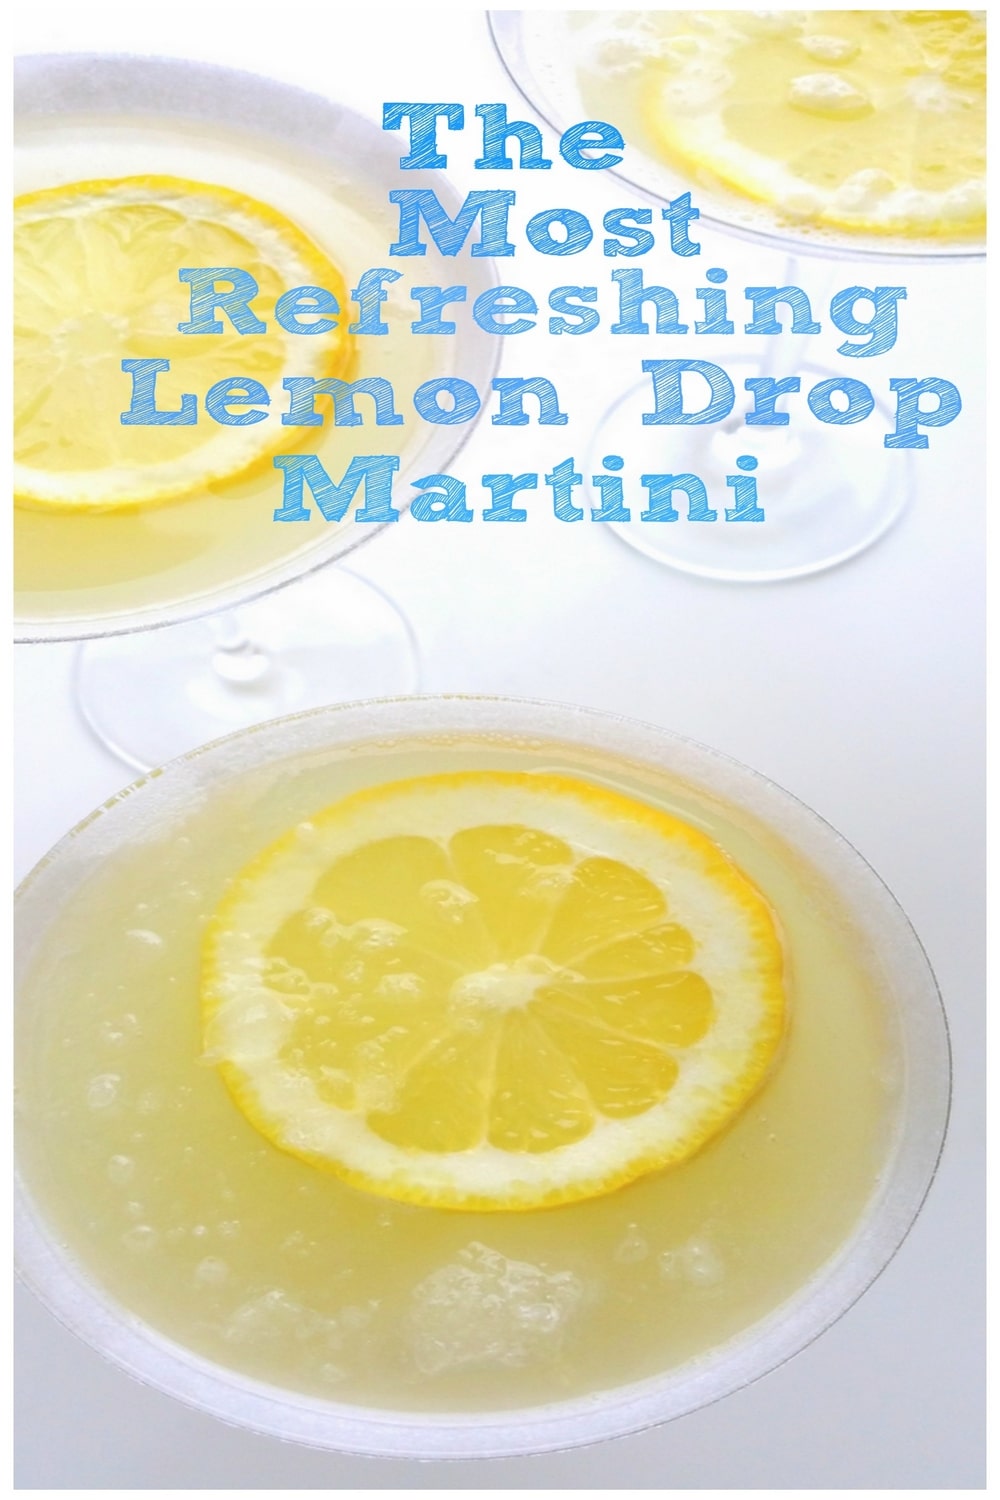 The perfect lemon drop martini should be refreshingly tart, not cloyingly sweet. Lucky for you this is The Most Refreshing Lemon Drop Martini! Give it a try soon. via @cmpollak1